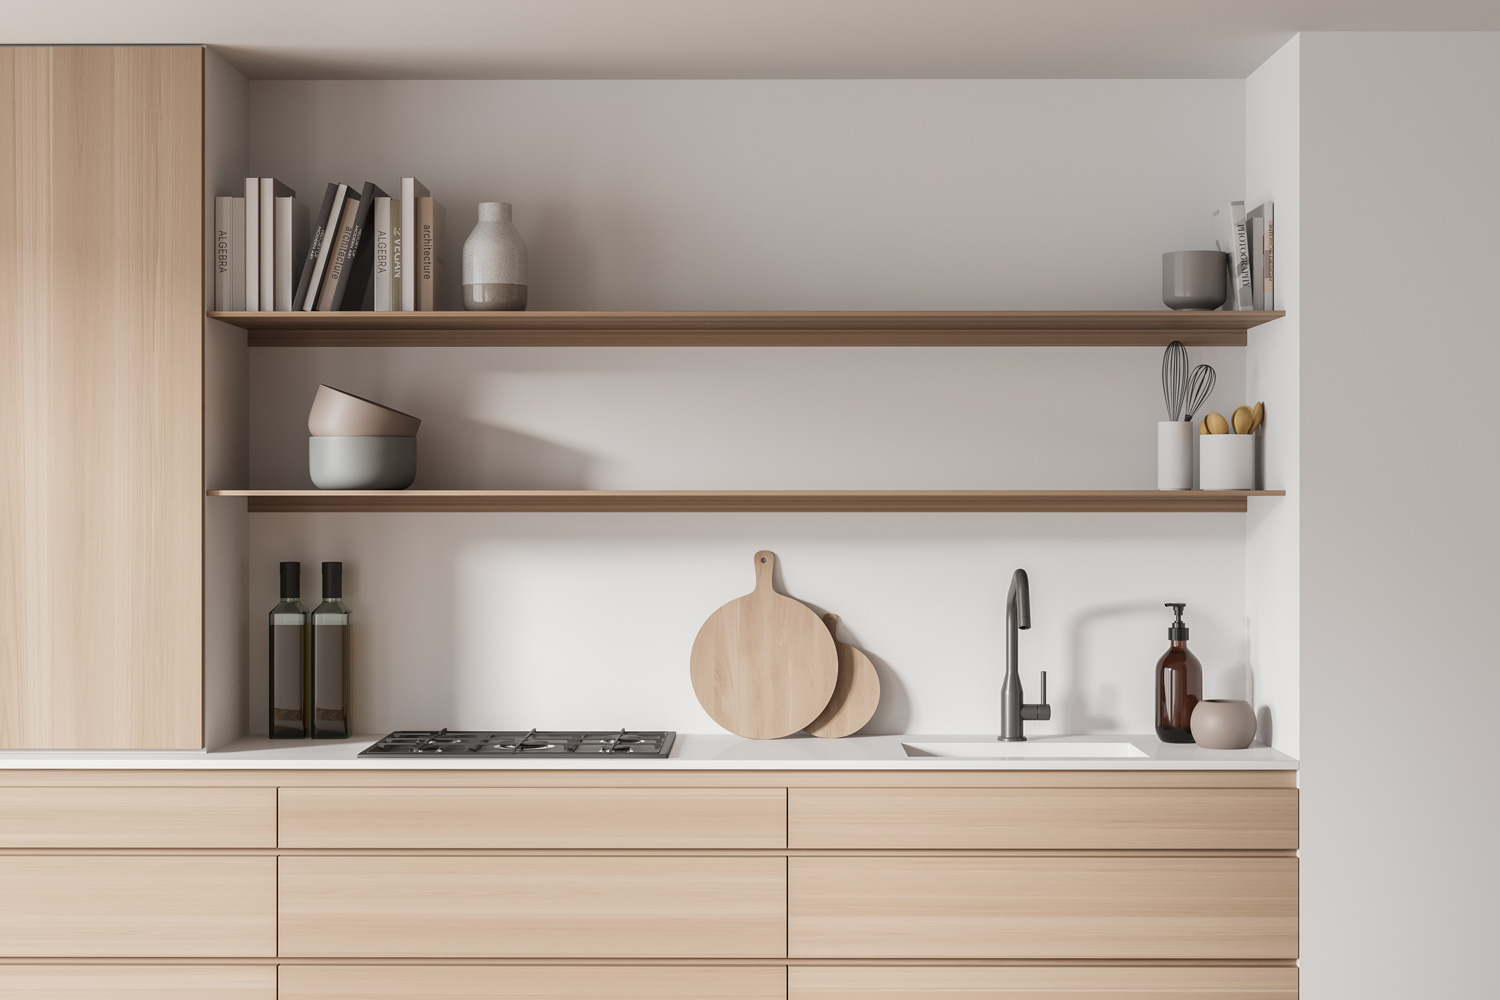 Close-up view of the kitchen interior with cabinet, having open shelves, wooden drawers of different sizes, white worktop and walls. Concept of modern house design.